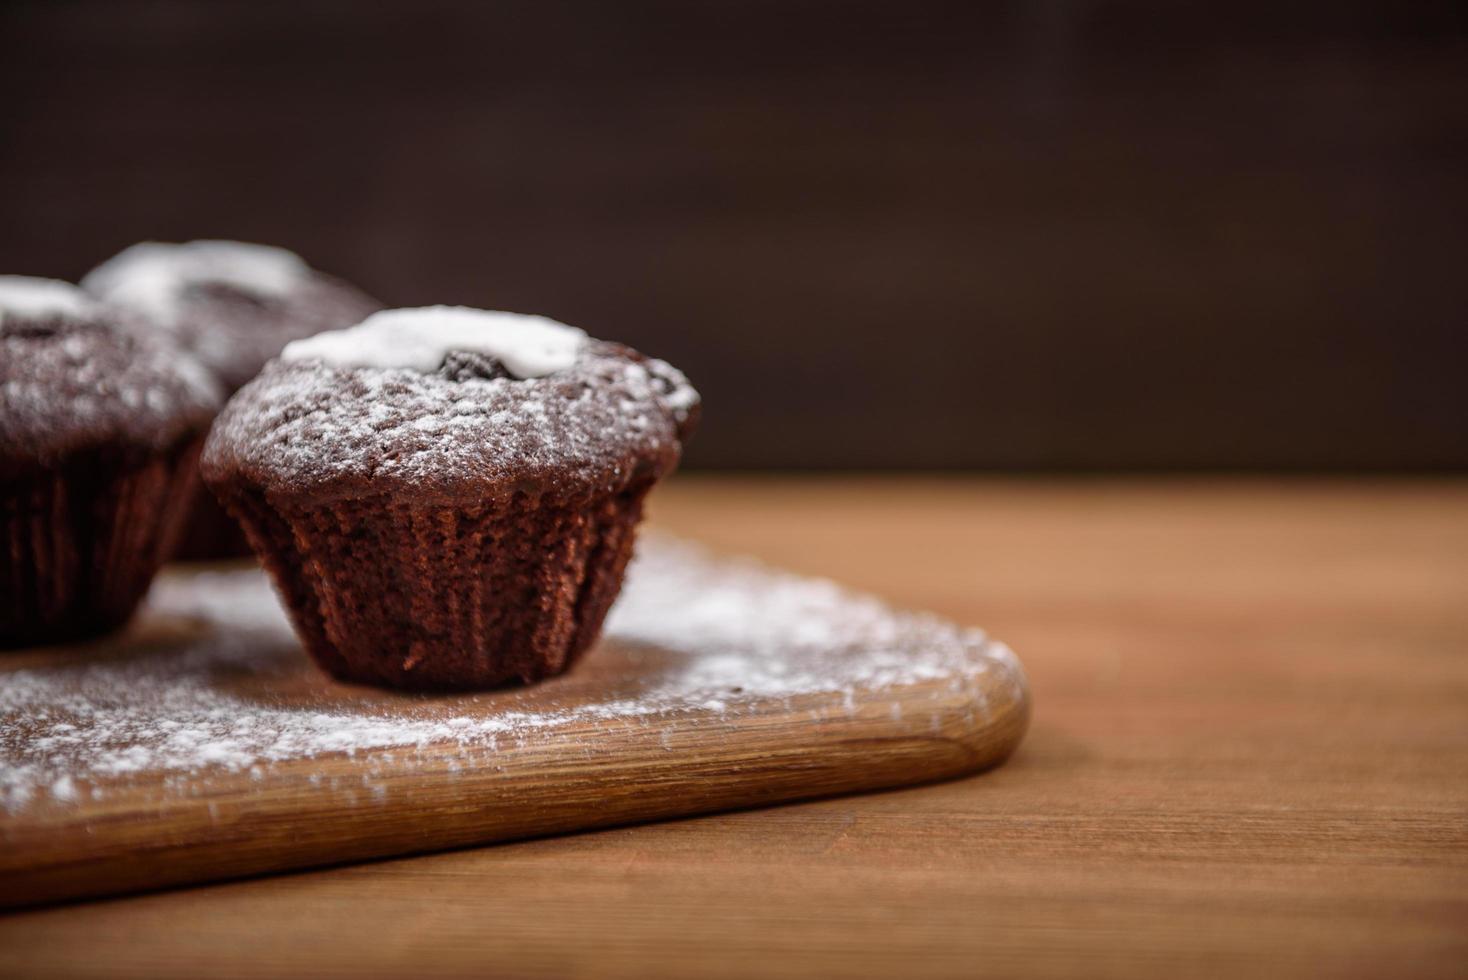 Chocolate muffins on the wood board photo